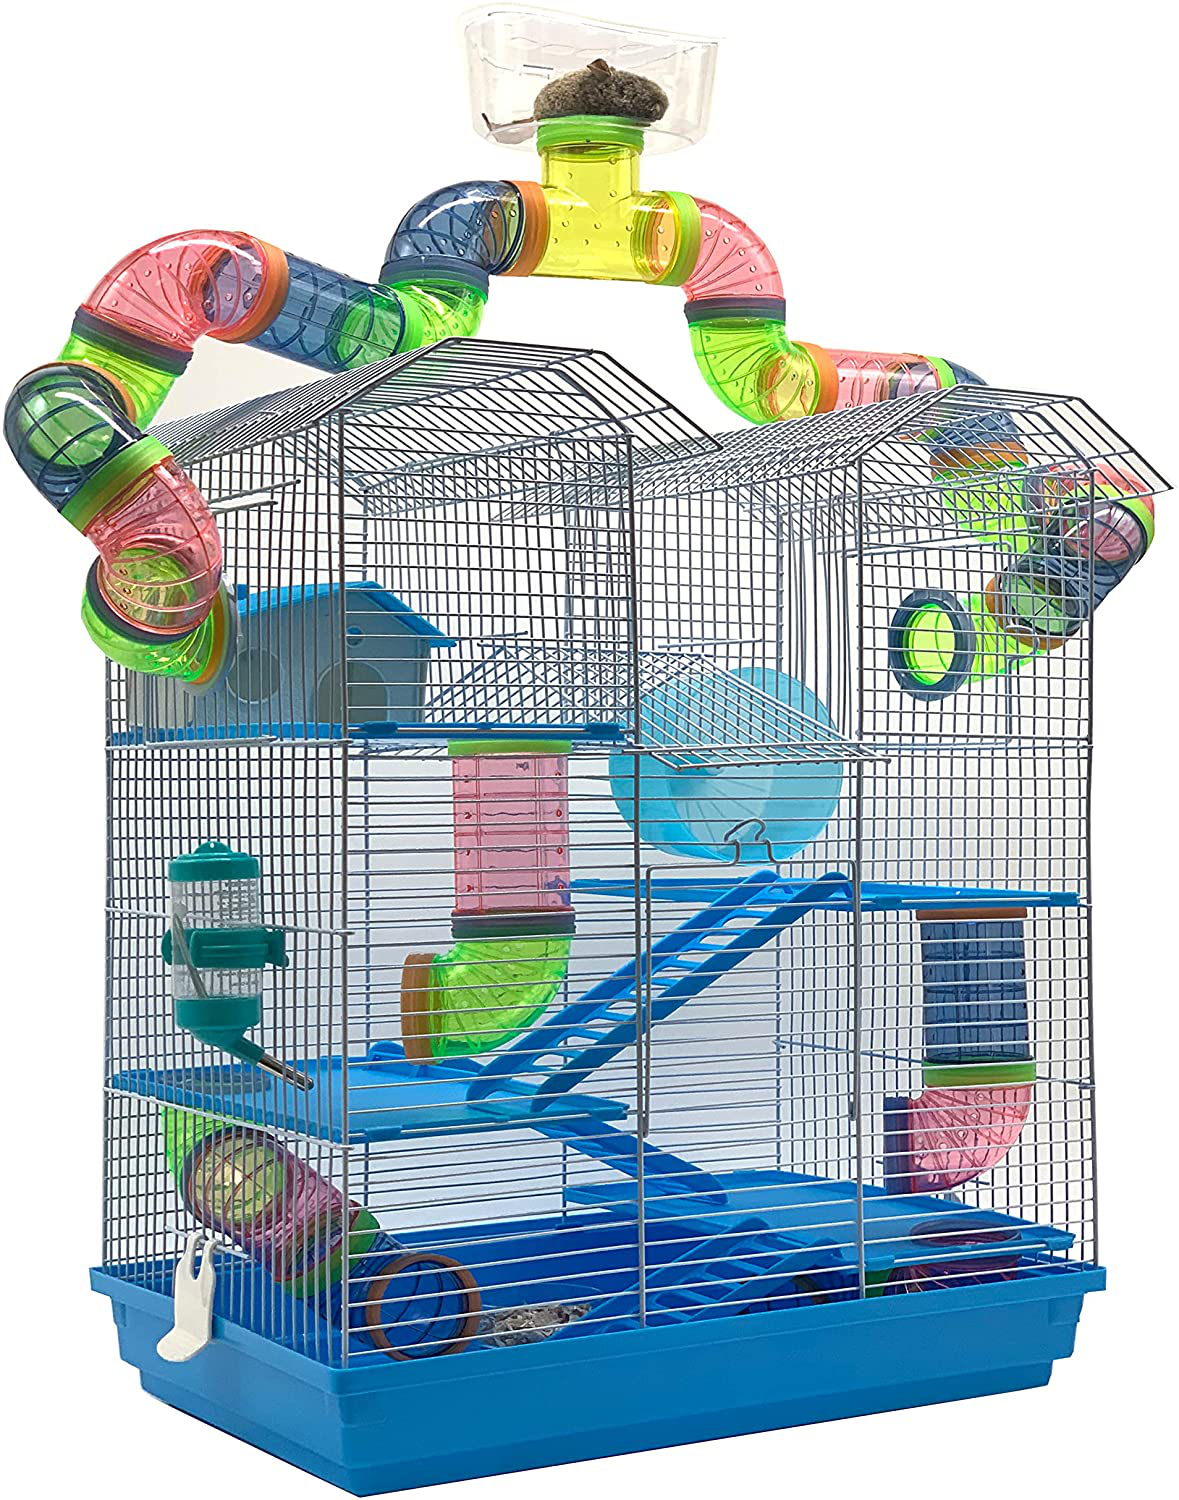 Large 5-Level Funland with Acrylic Clear Tunnels Tubes Base Top Play Zone for Habitat Hamster Rodent Gerbil Mouse Mice Small Animal Critter Cage Animals & Pet Supplies > Pet Supplies > Small Animal Supplies > Small Animal Habitats & Cages Mcage Blue 24"L x 14"W x 34"H 